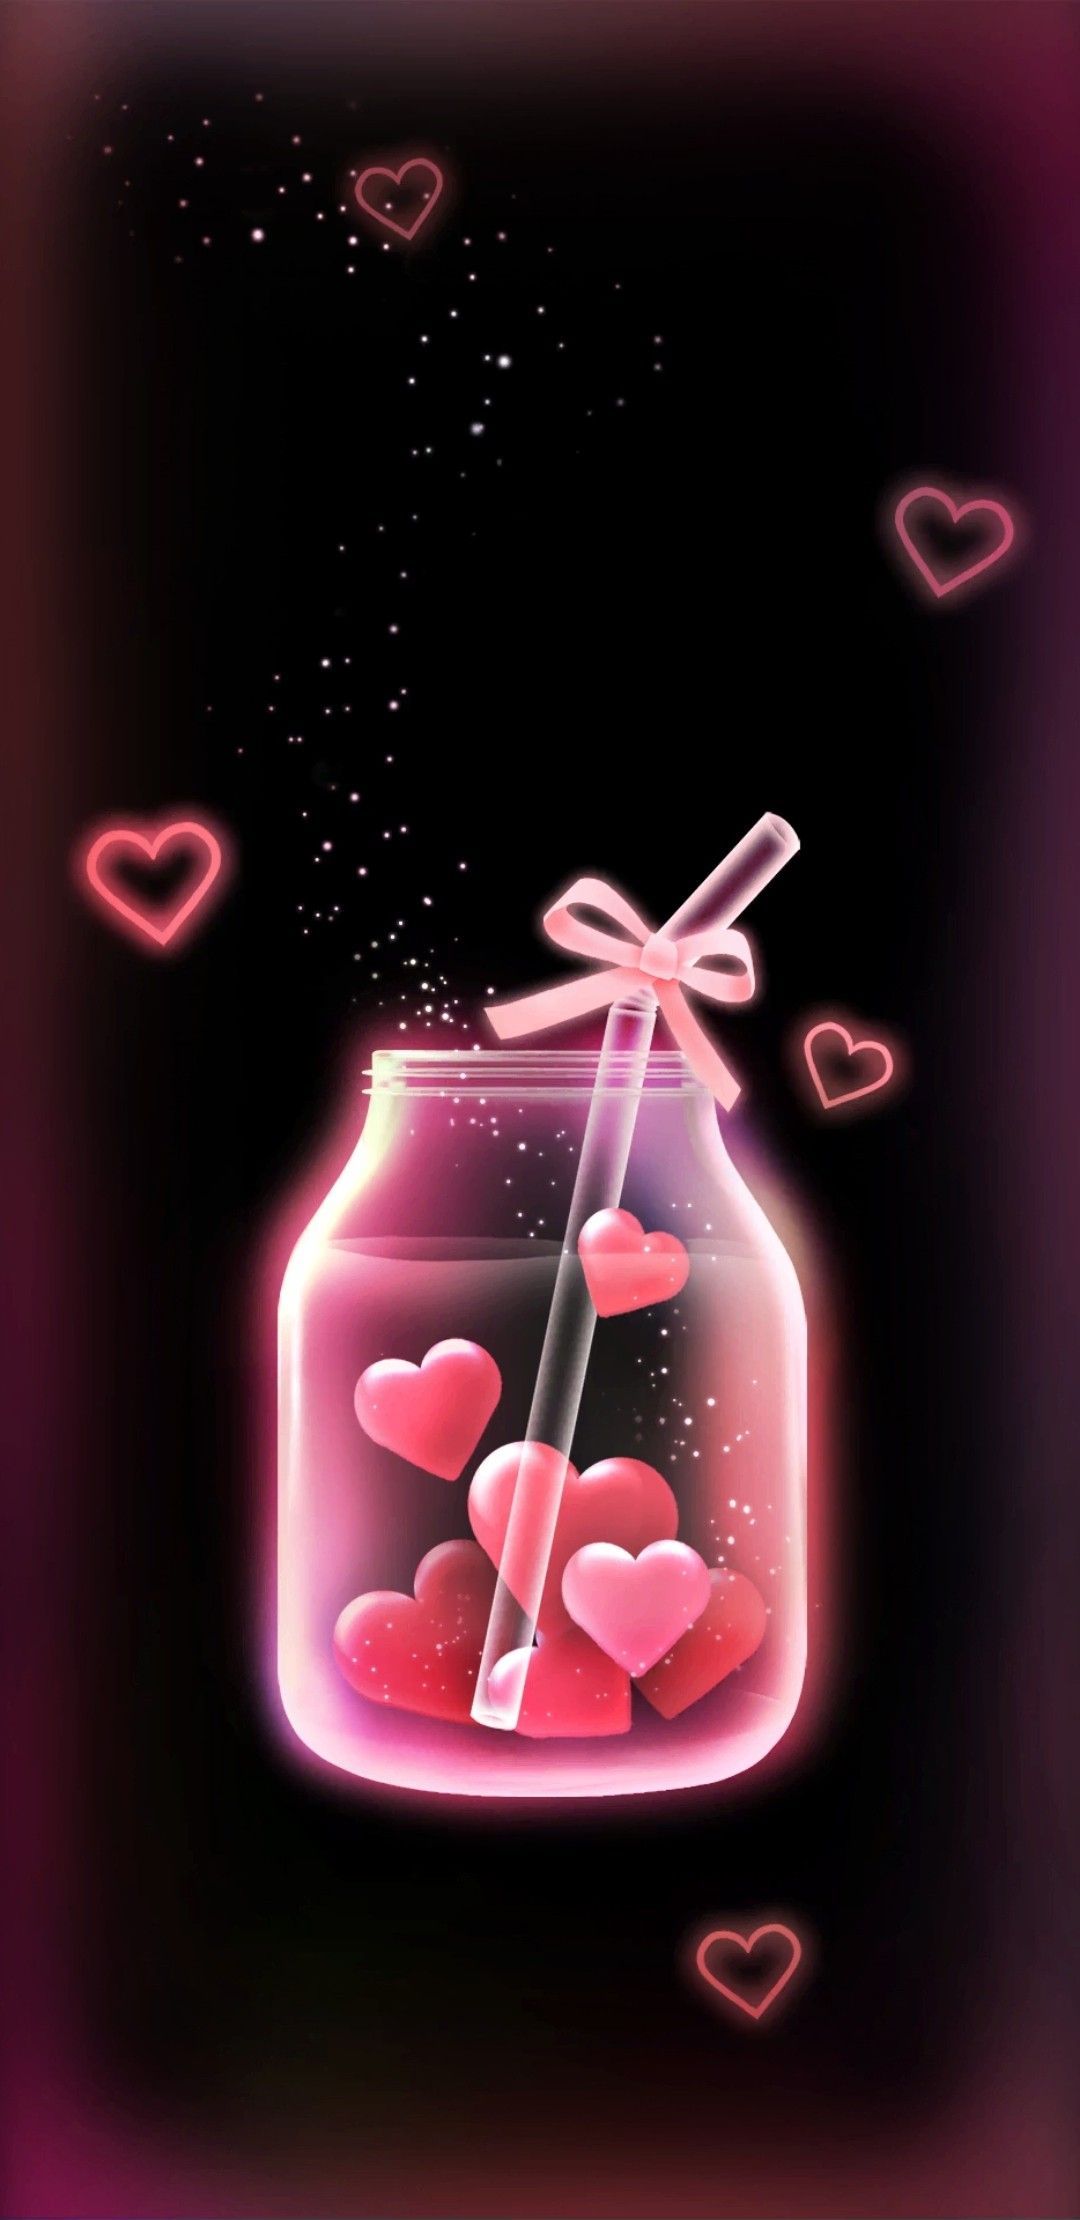 Valentines Day Wallpaper Iphone - HD Wallpaper 